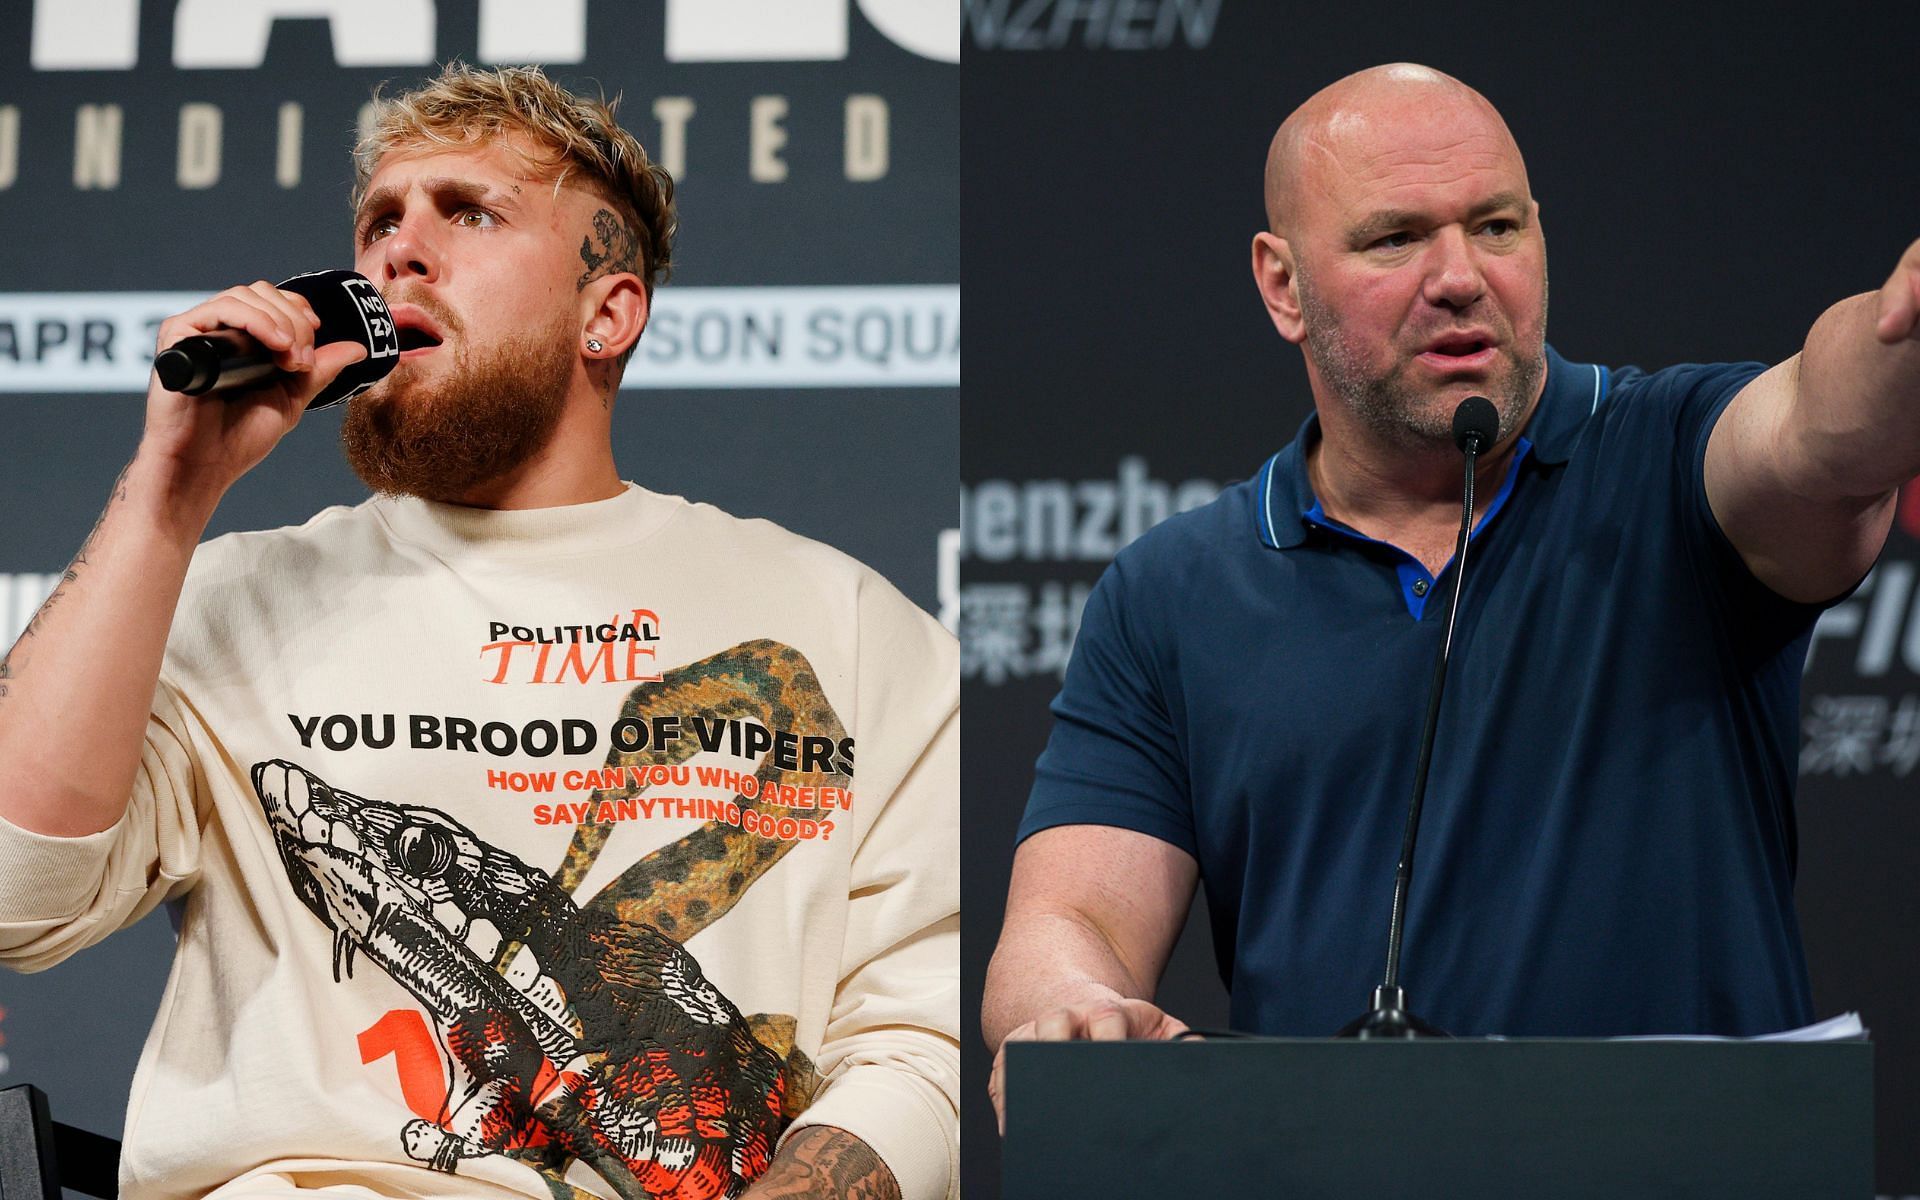 Jake Paul (left) and Dana White (right) (Image credits Getty Images)